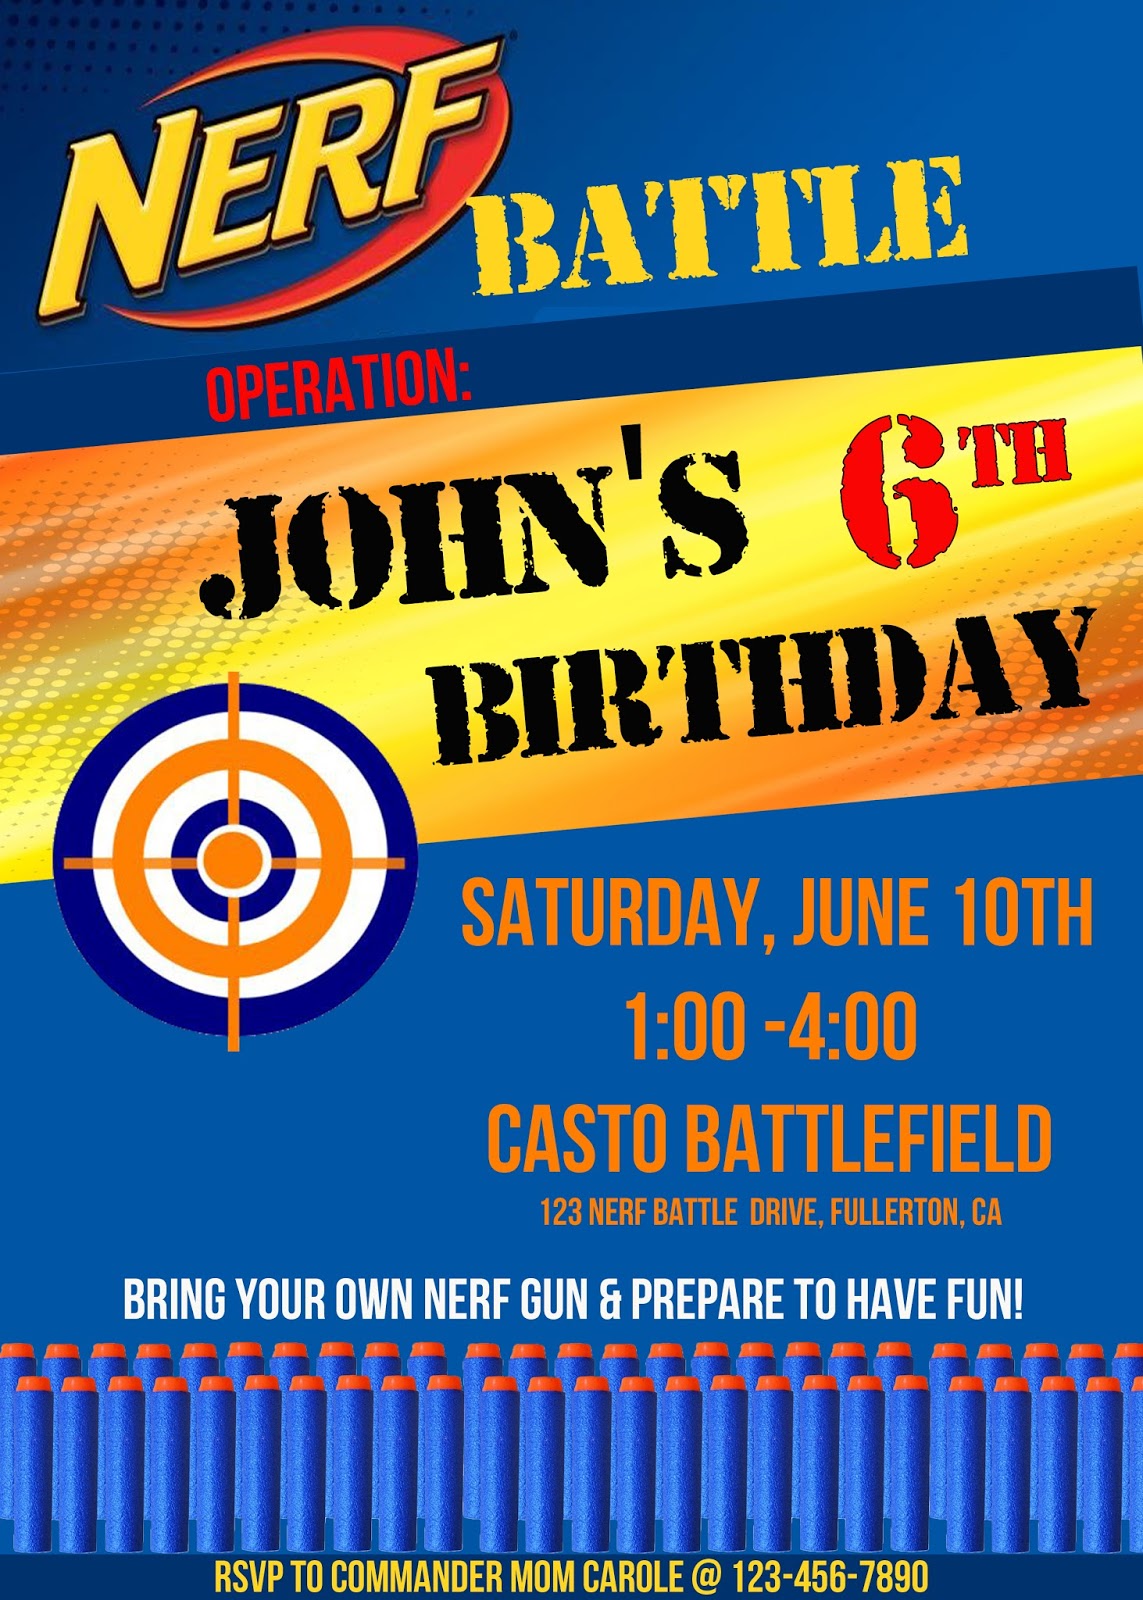 invite-and-delight-nerf-gun-party